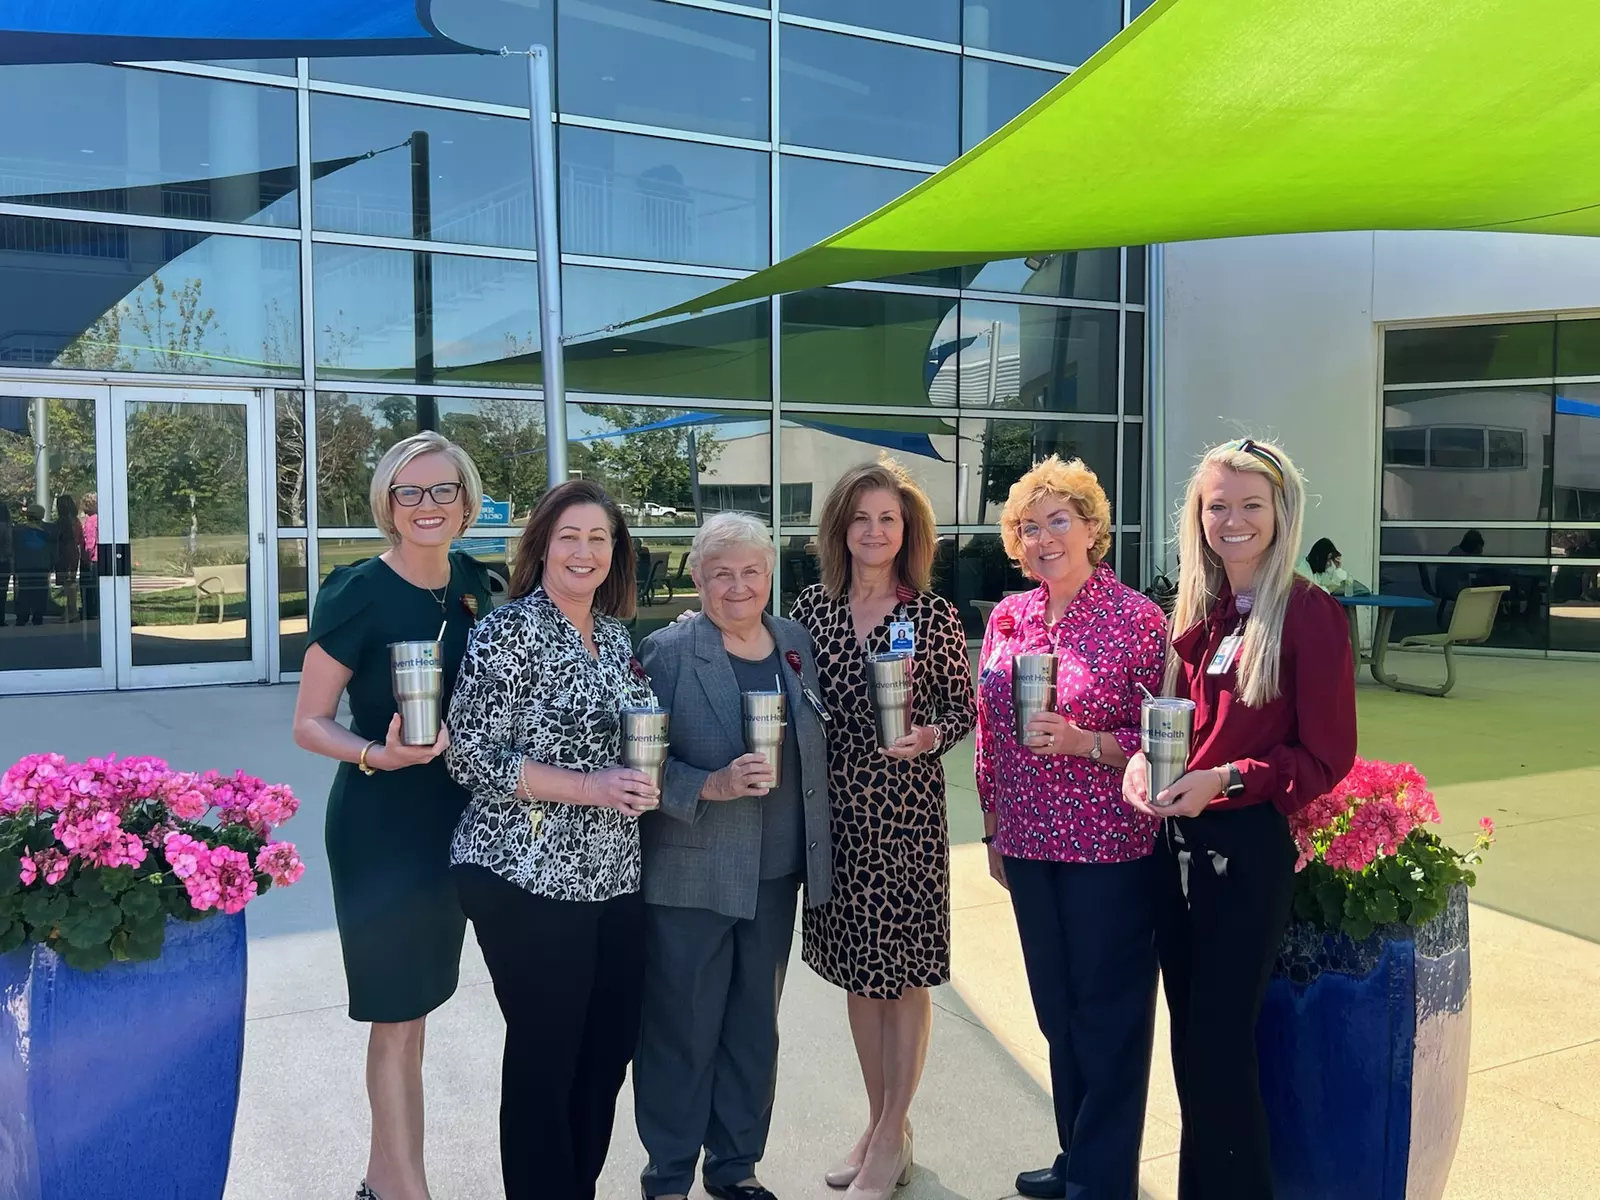 The small act of sipping from a reusable tumbler can make a big impact on patients, team members and the communities AdventHealth serves.